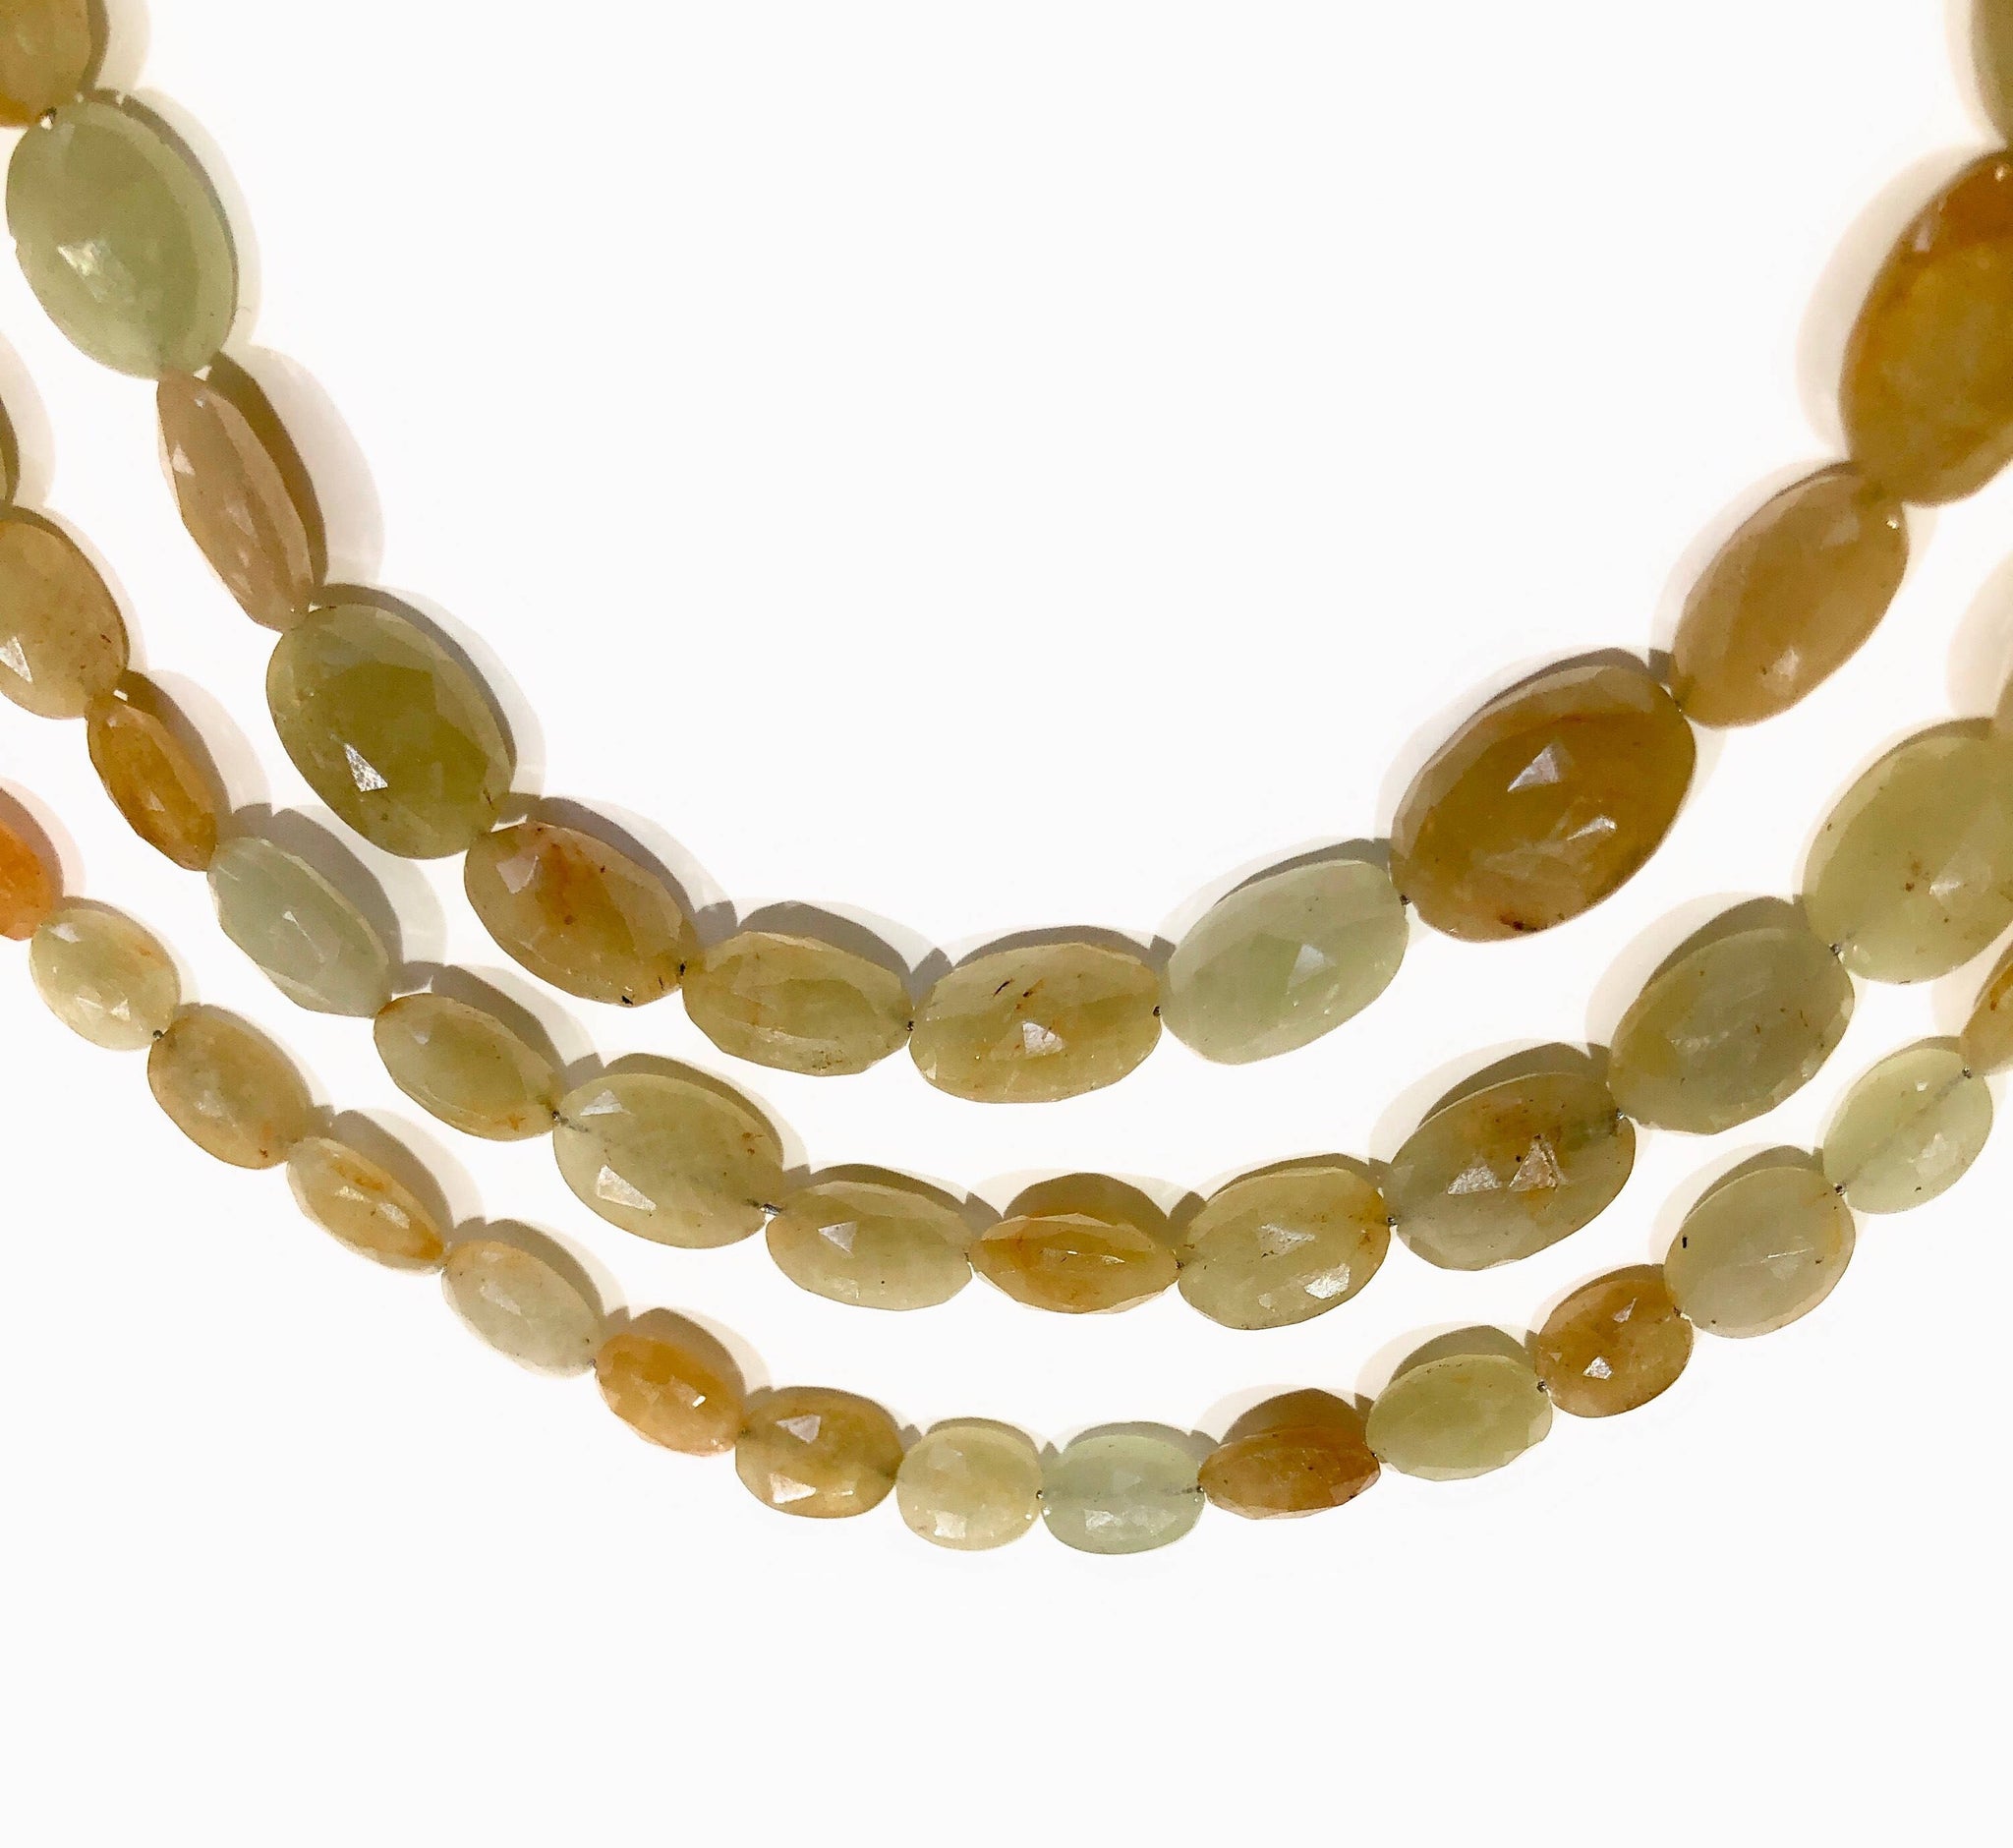 Wholesale Natural Gemstone Beads for Jewelry Making